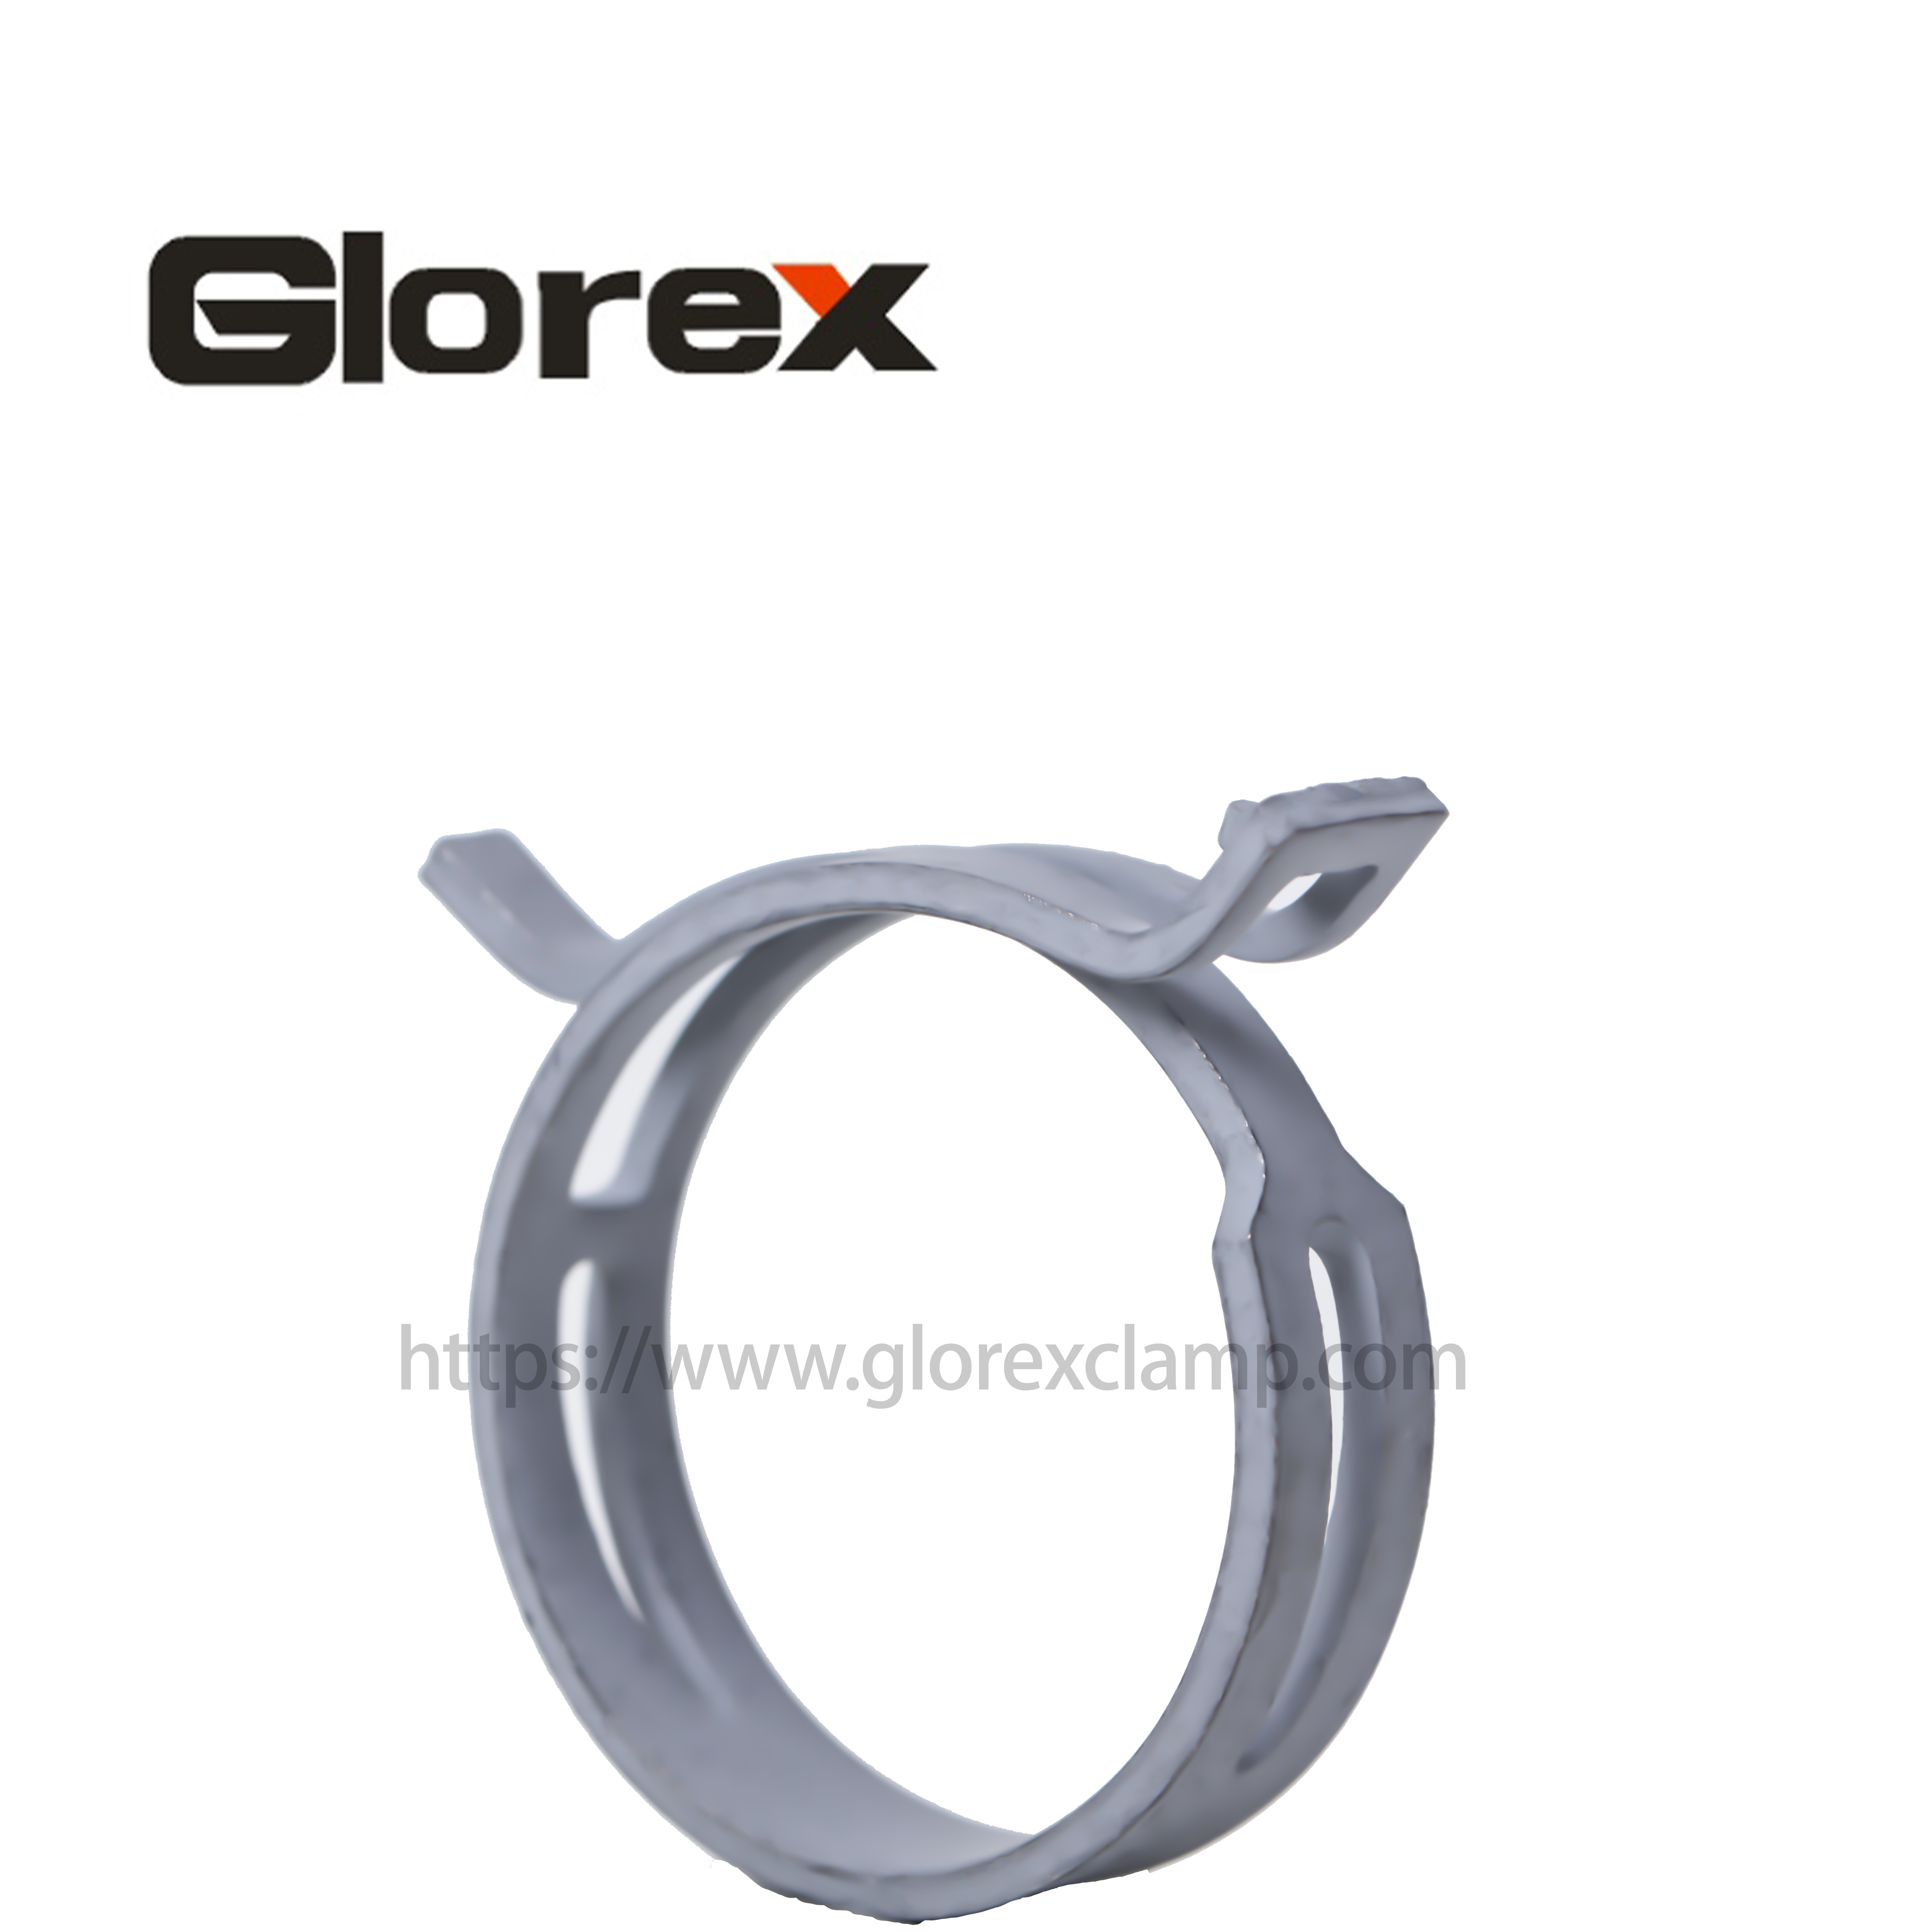 Wholesale Dealers of Pipe Couplings And Clamps - Spring hose clamp – Glorex